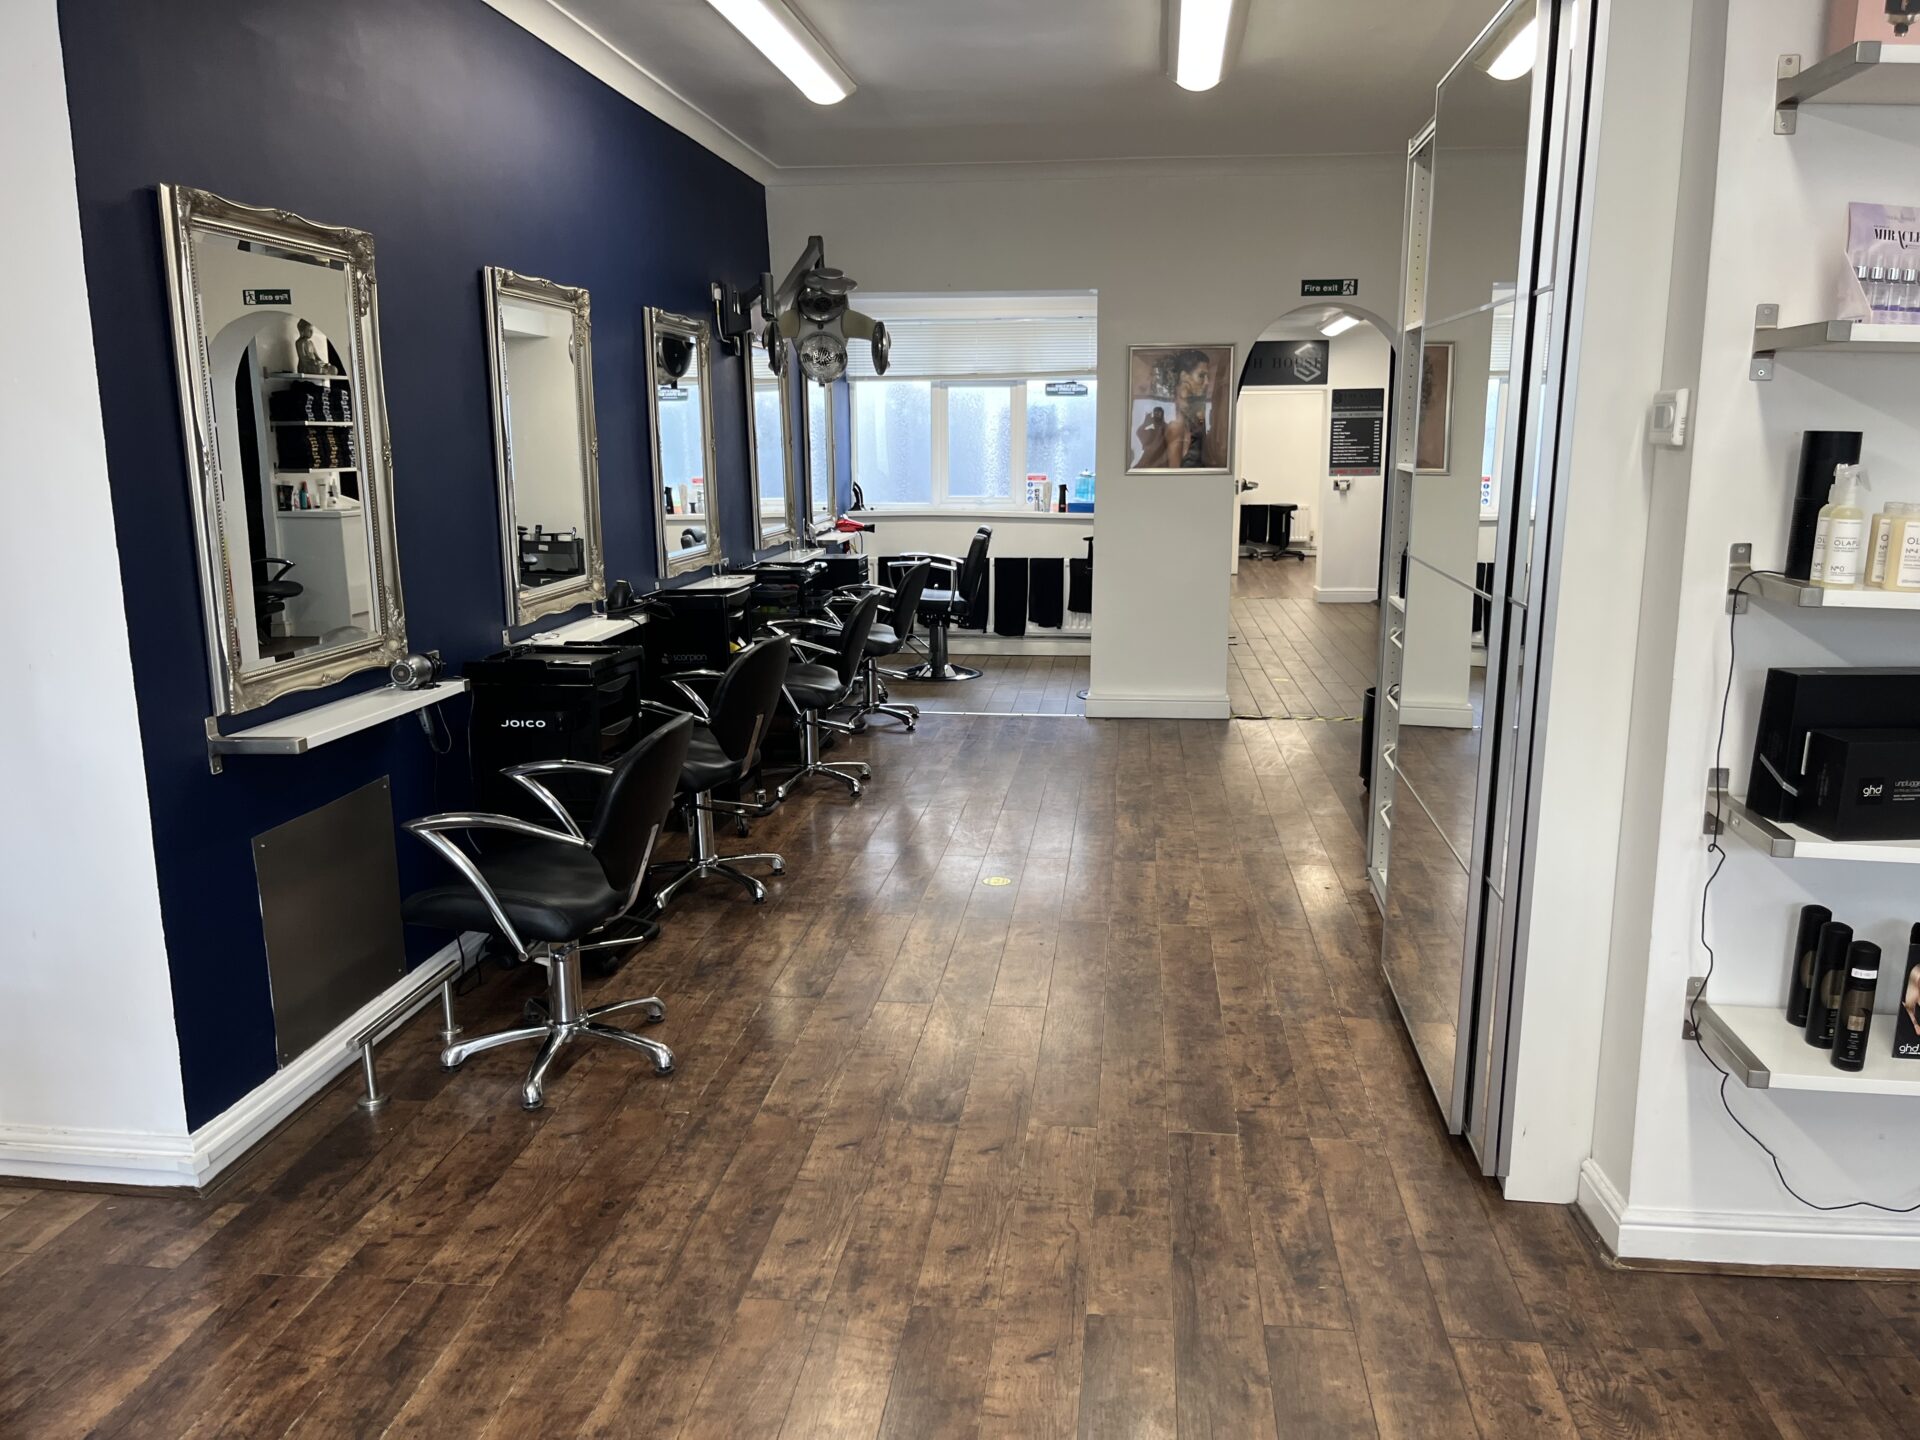 The Salon in Langley Park